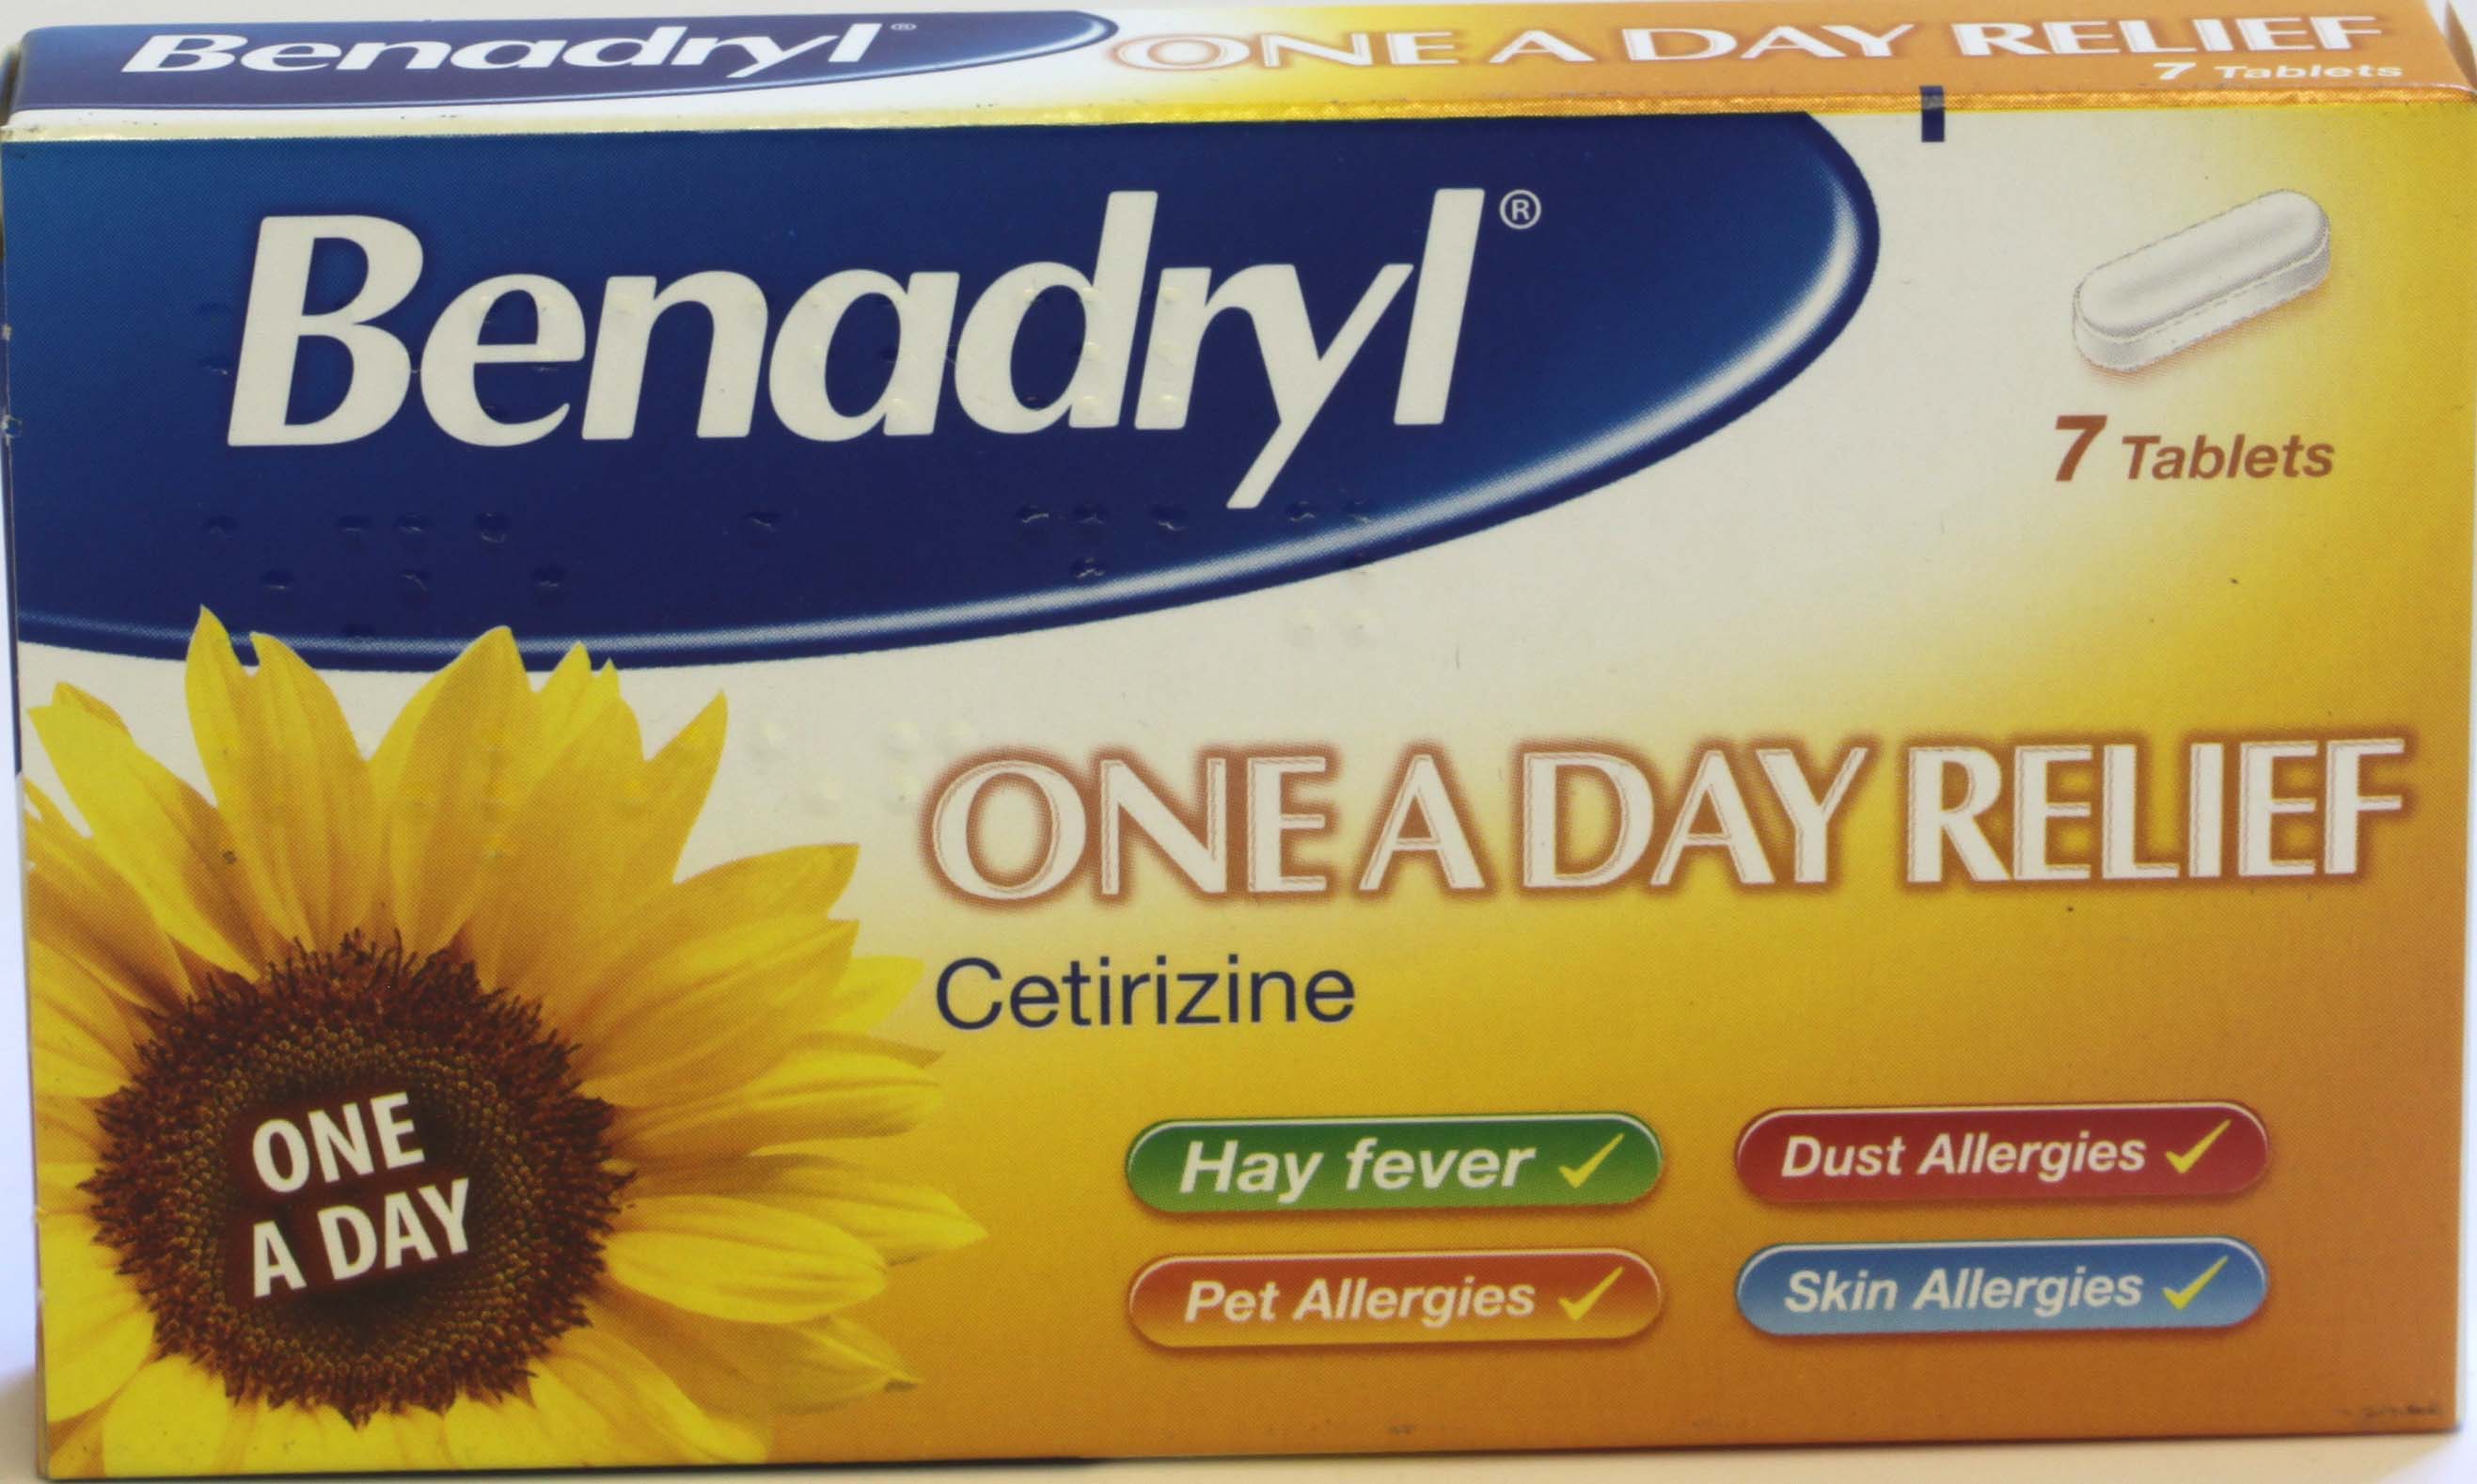 Benadryl One A Day Relief Tablets - 7